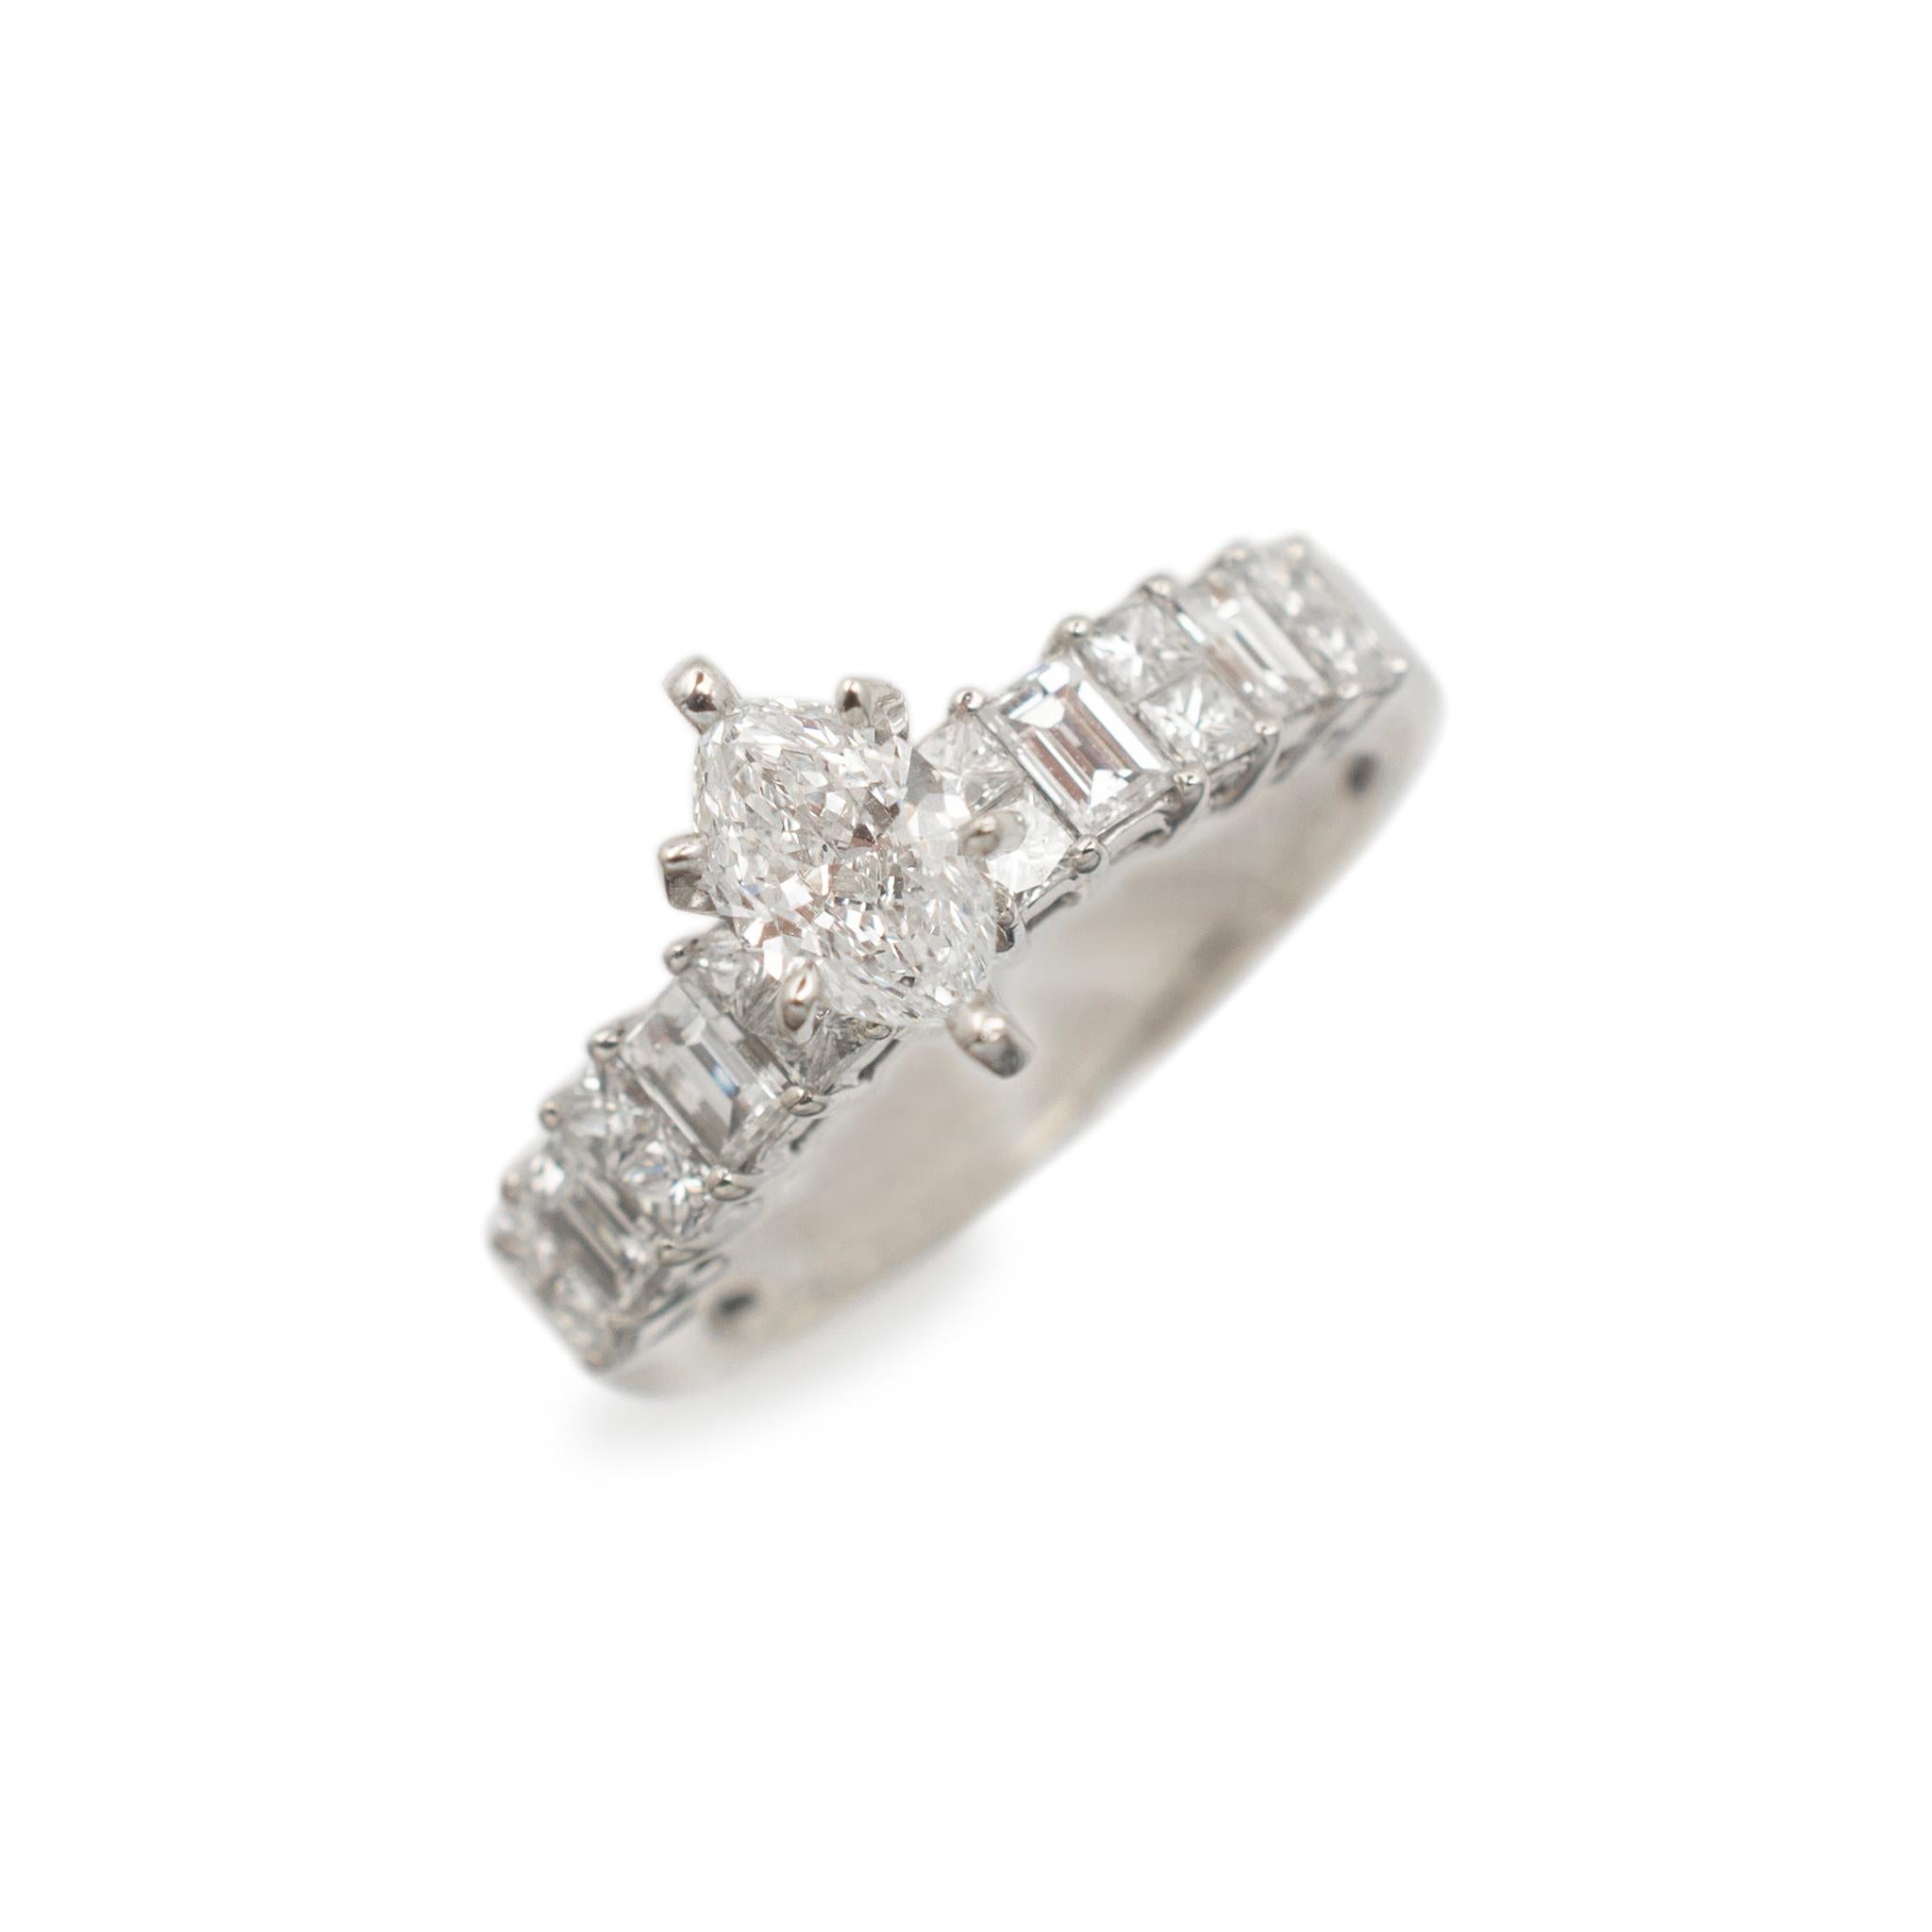 Gender: Ladies

Metal Type: 14K White Gold

Size: 6

Shank Width: 3.50mm

Weight: 4.20 grams

Ladies 14K white gold diamond engagement ring with a soft-square shank. Engraved with 